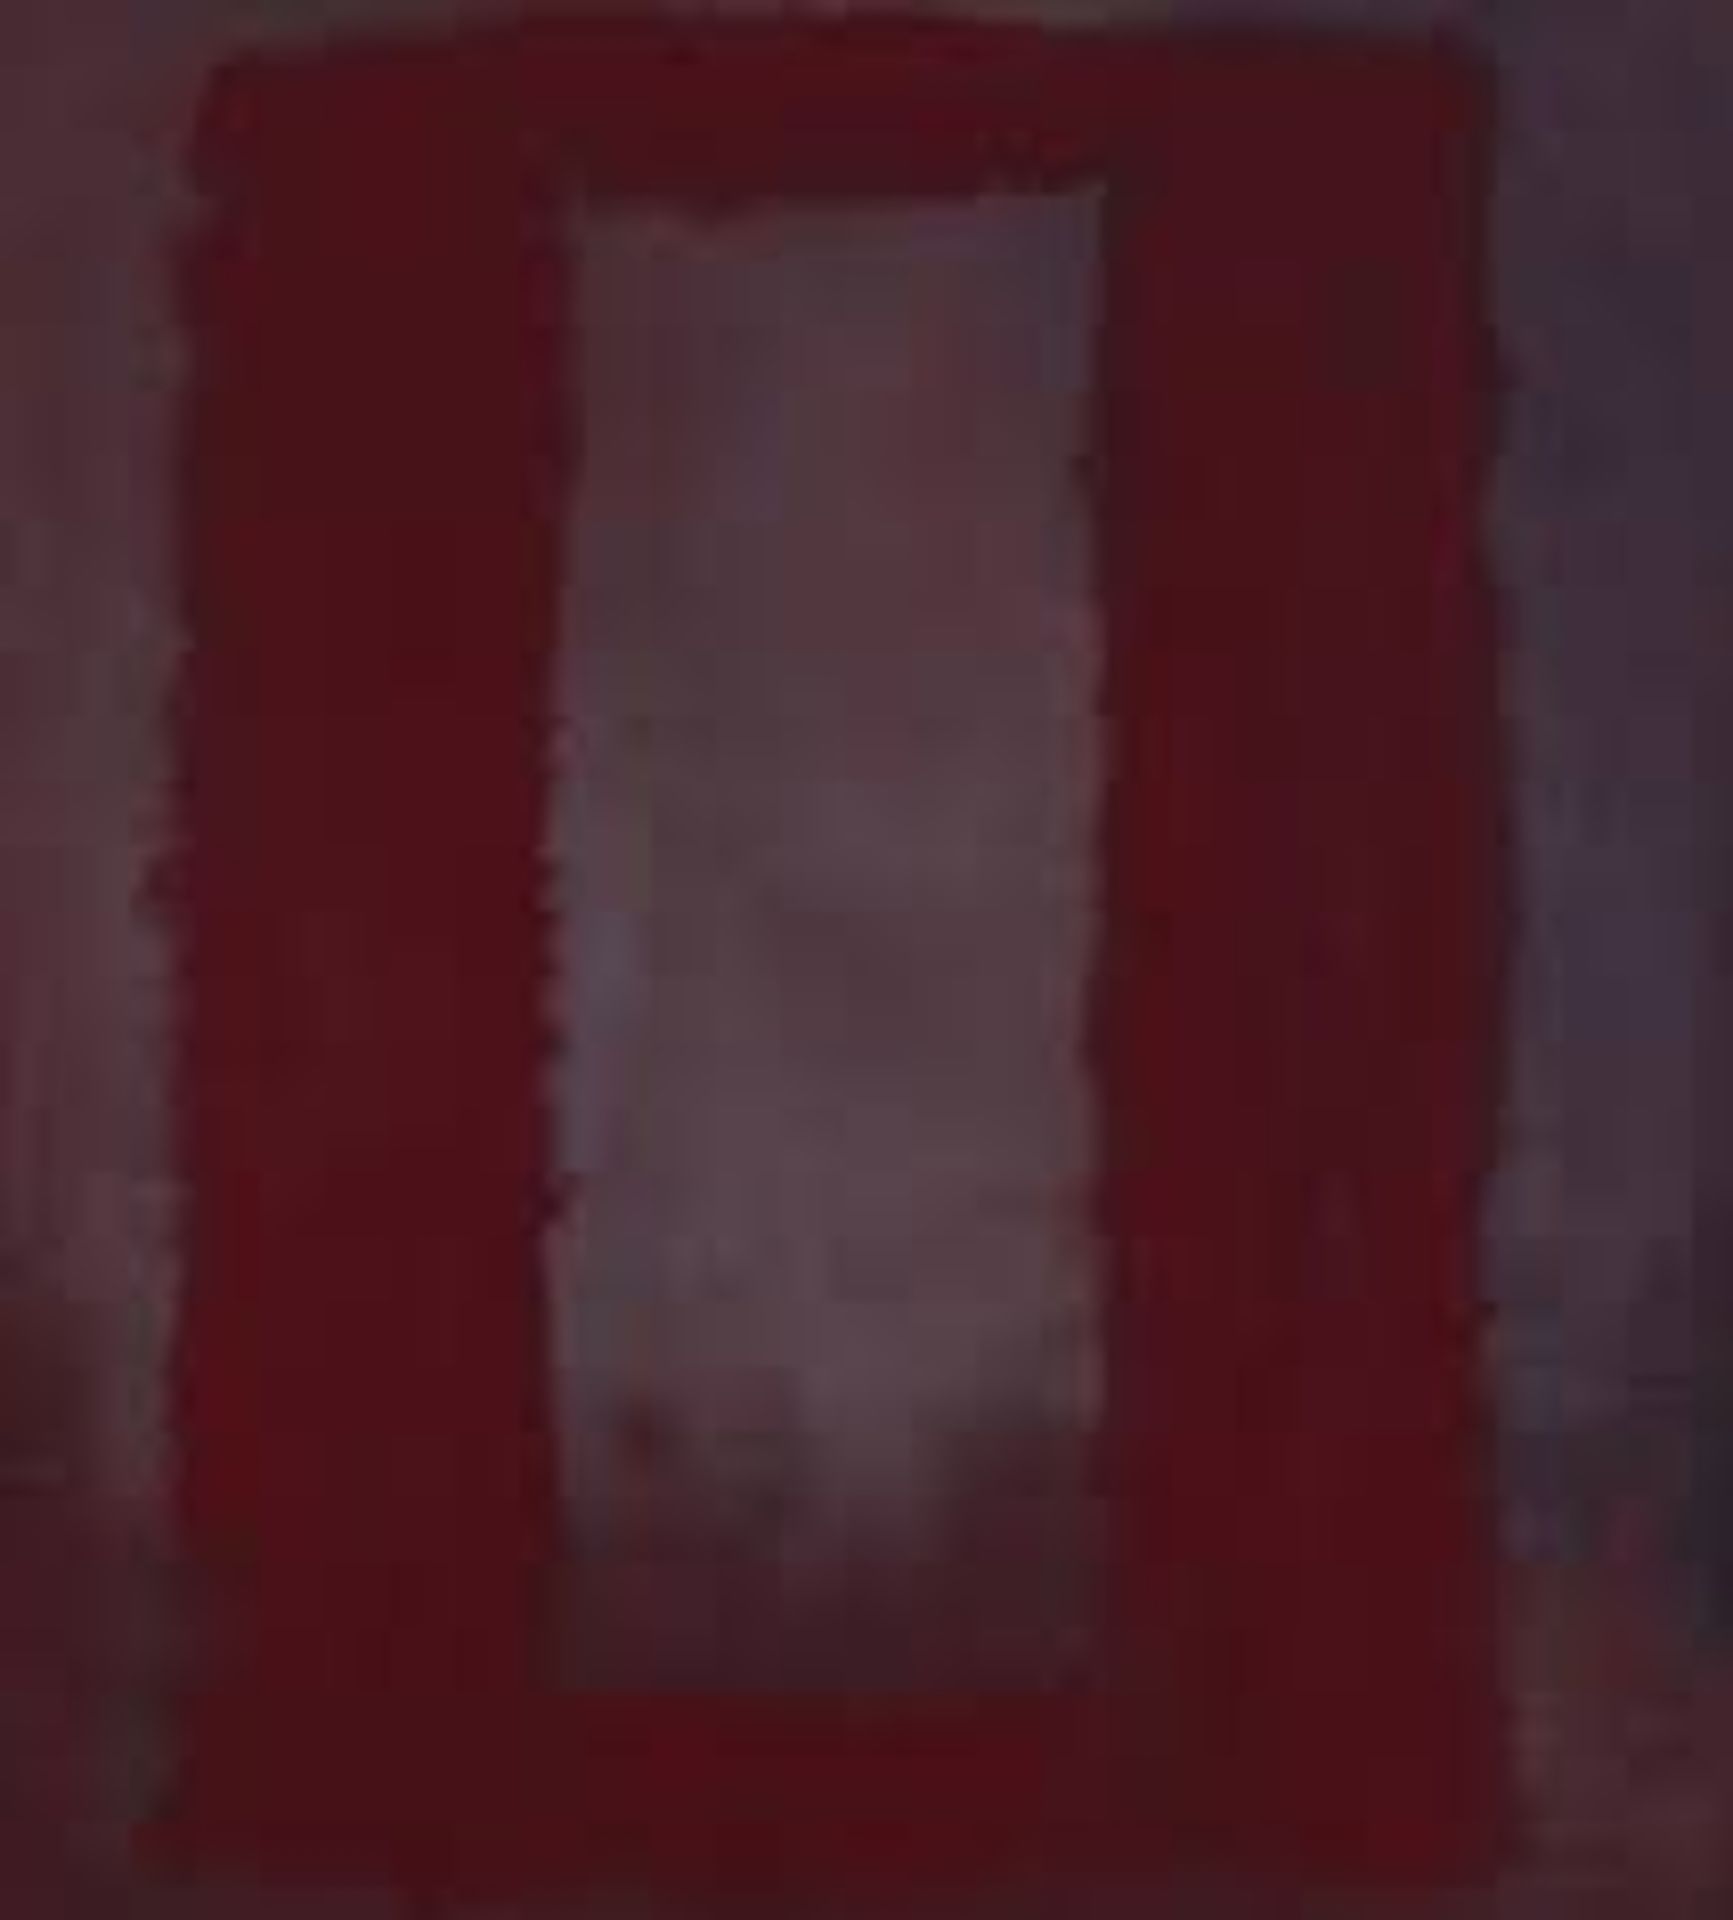 Mark Rothko "Red, Maroon, 1959" Offset Lithograph